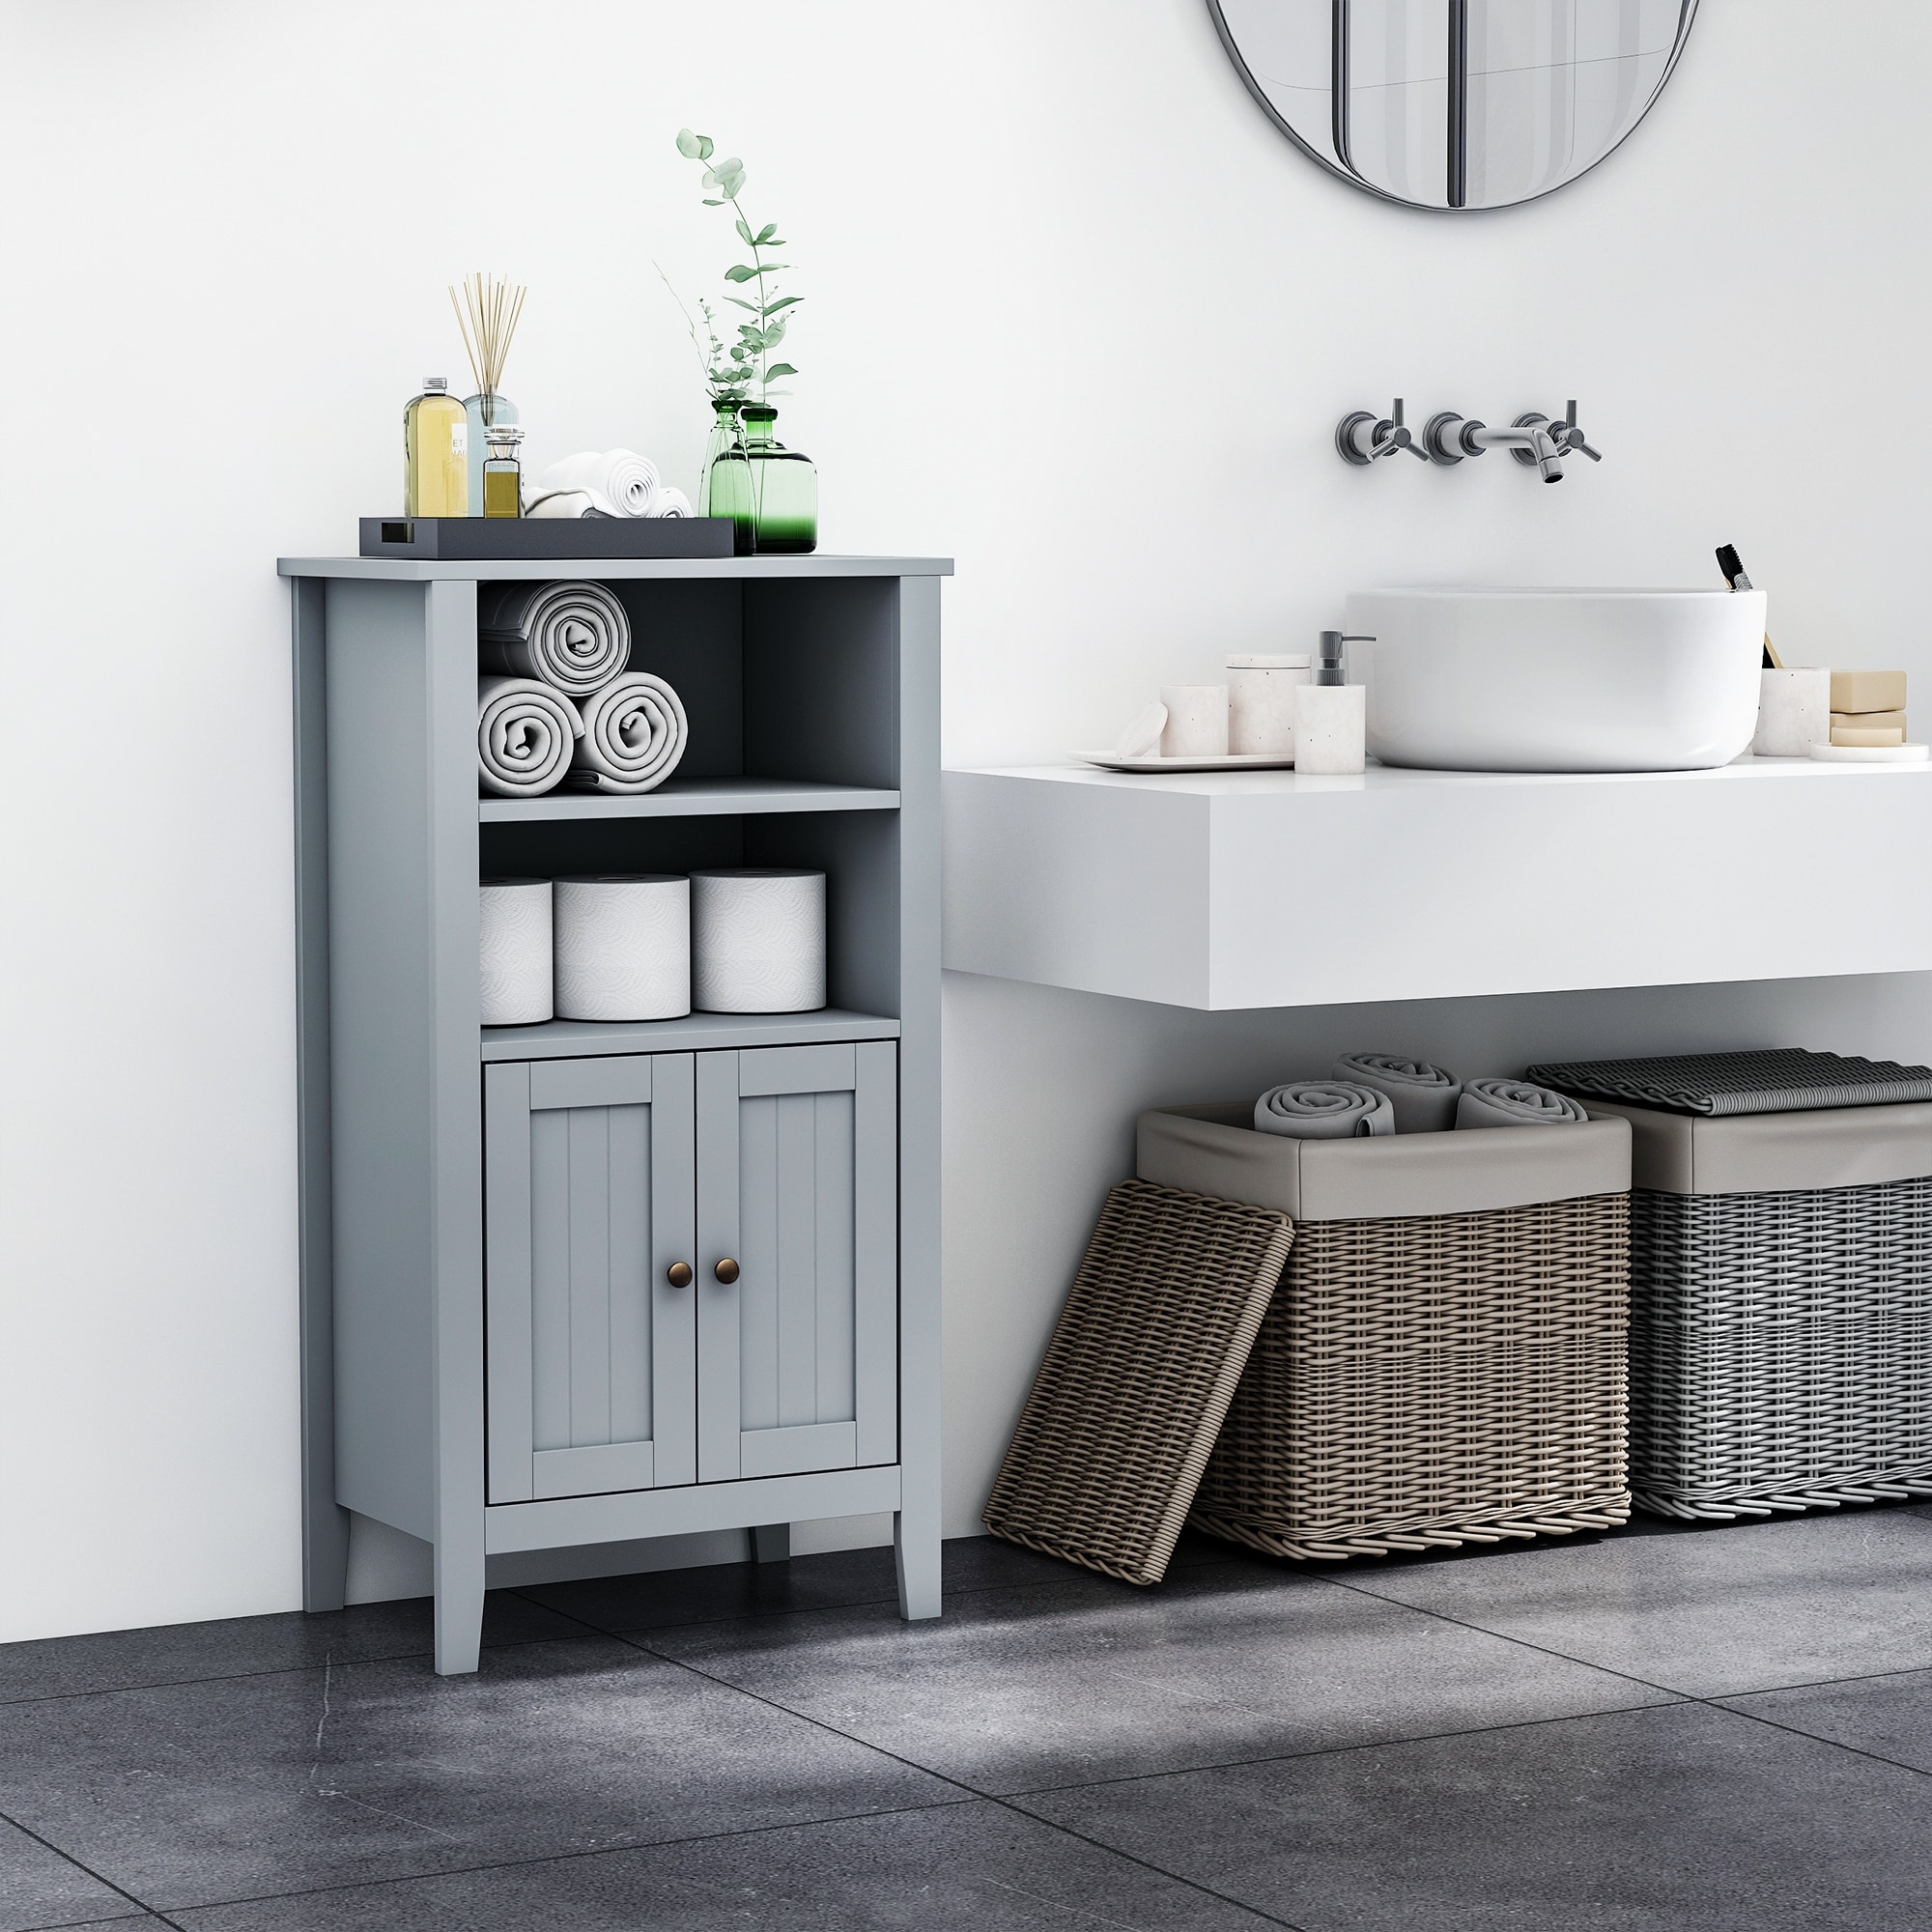 https://ak1.ostkcdn.com/images/products/is/images/direct/484f006e5072dfcaf866e8ef3c09c6ef100058d8/Kleankin-Bathroom-Cabinet-Organizer-with-2-Tier-Open-Shelves%2C-Double-Door-Enclosed-Storage-and-Elevated-Base.jpg